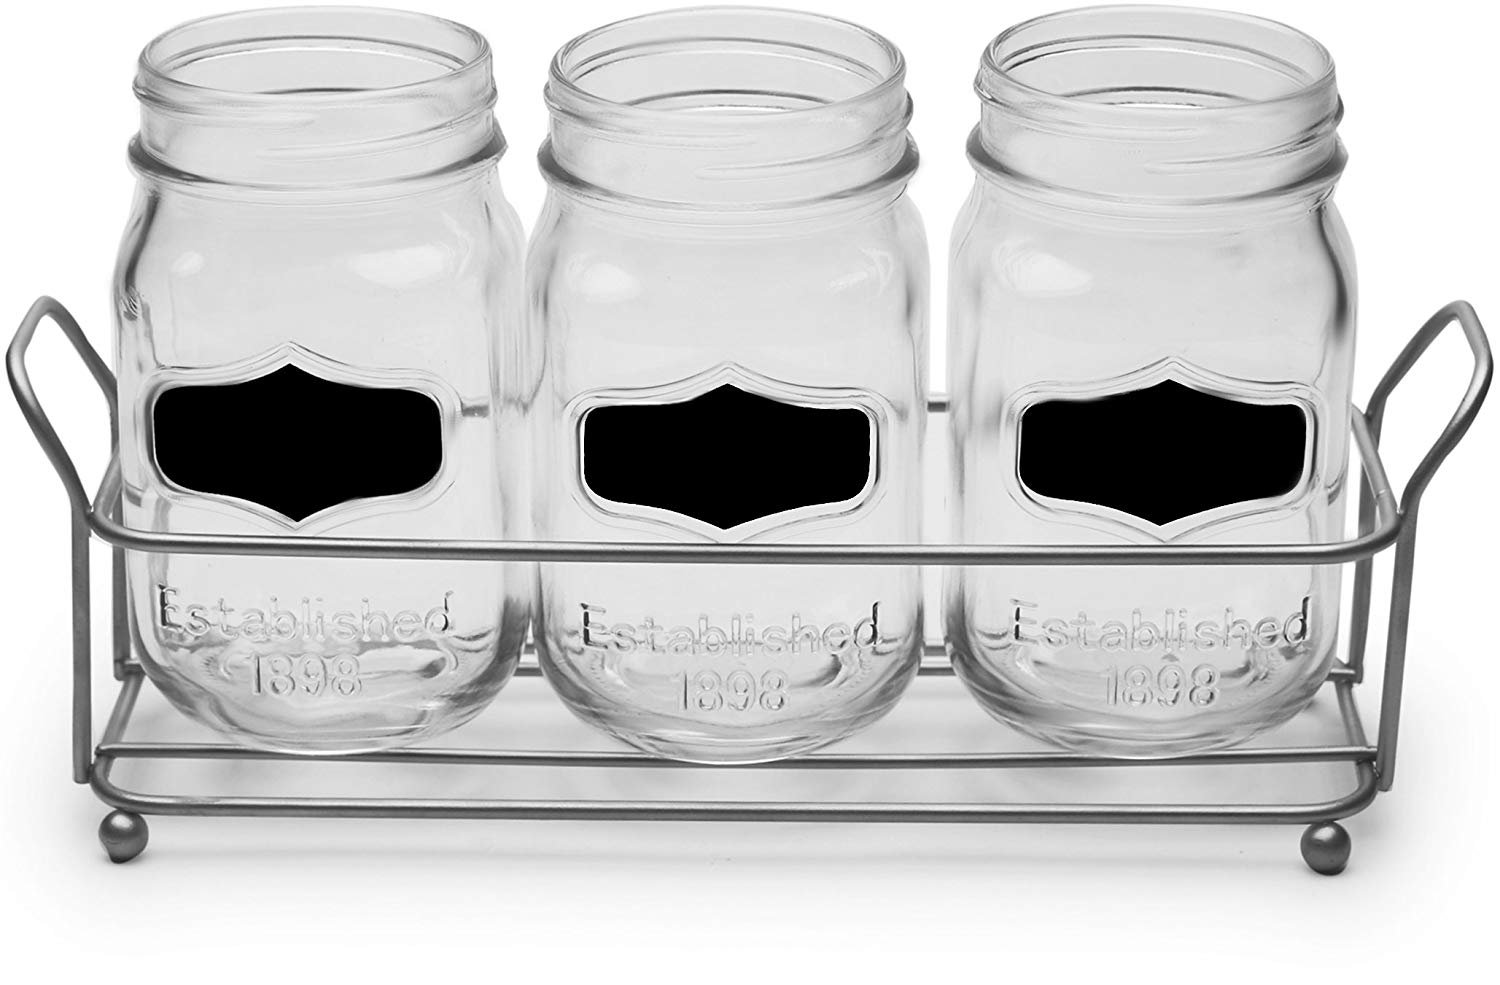 Circleware Chalkboard Mason Jar Glasses with Metal Holder Stand, Set of 4, Home & Kitchen Farmhouse Décor Drink Tumblers for Water, Beer and Beverages, 17 oz, 69075